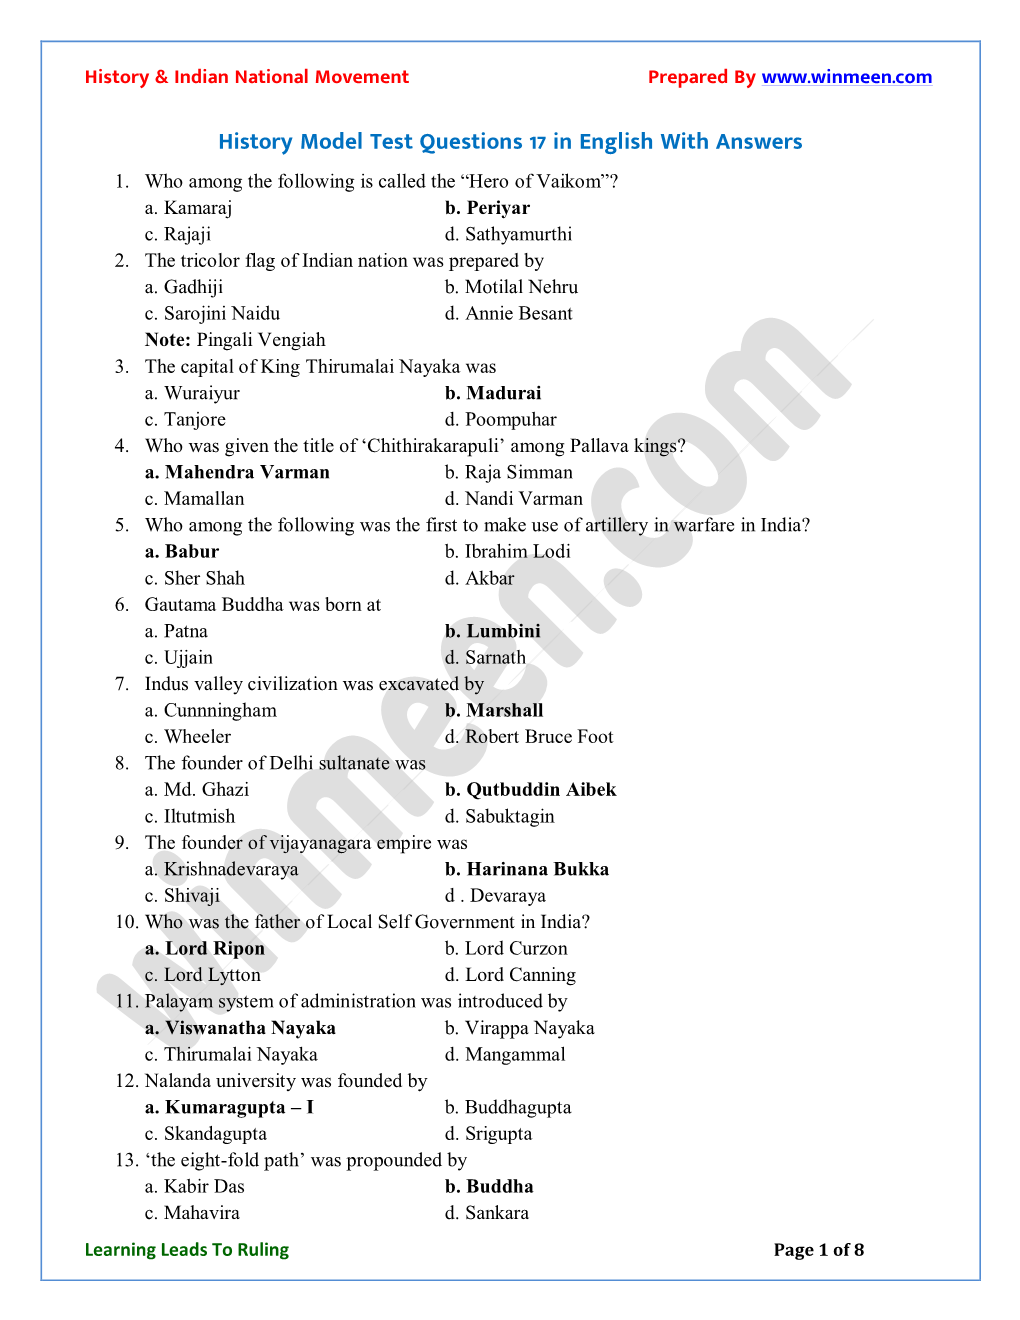 History Model Test Questions 17 in English with Answers 1